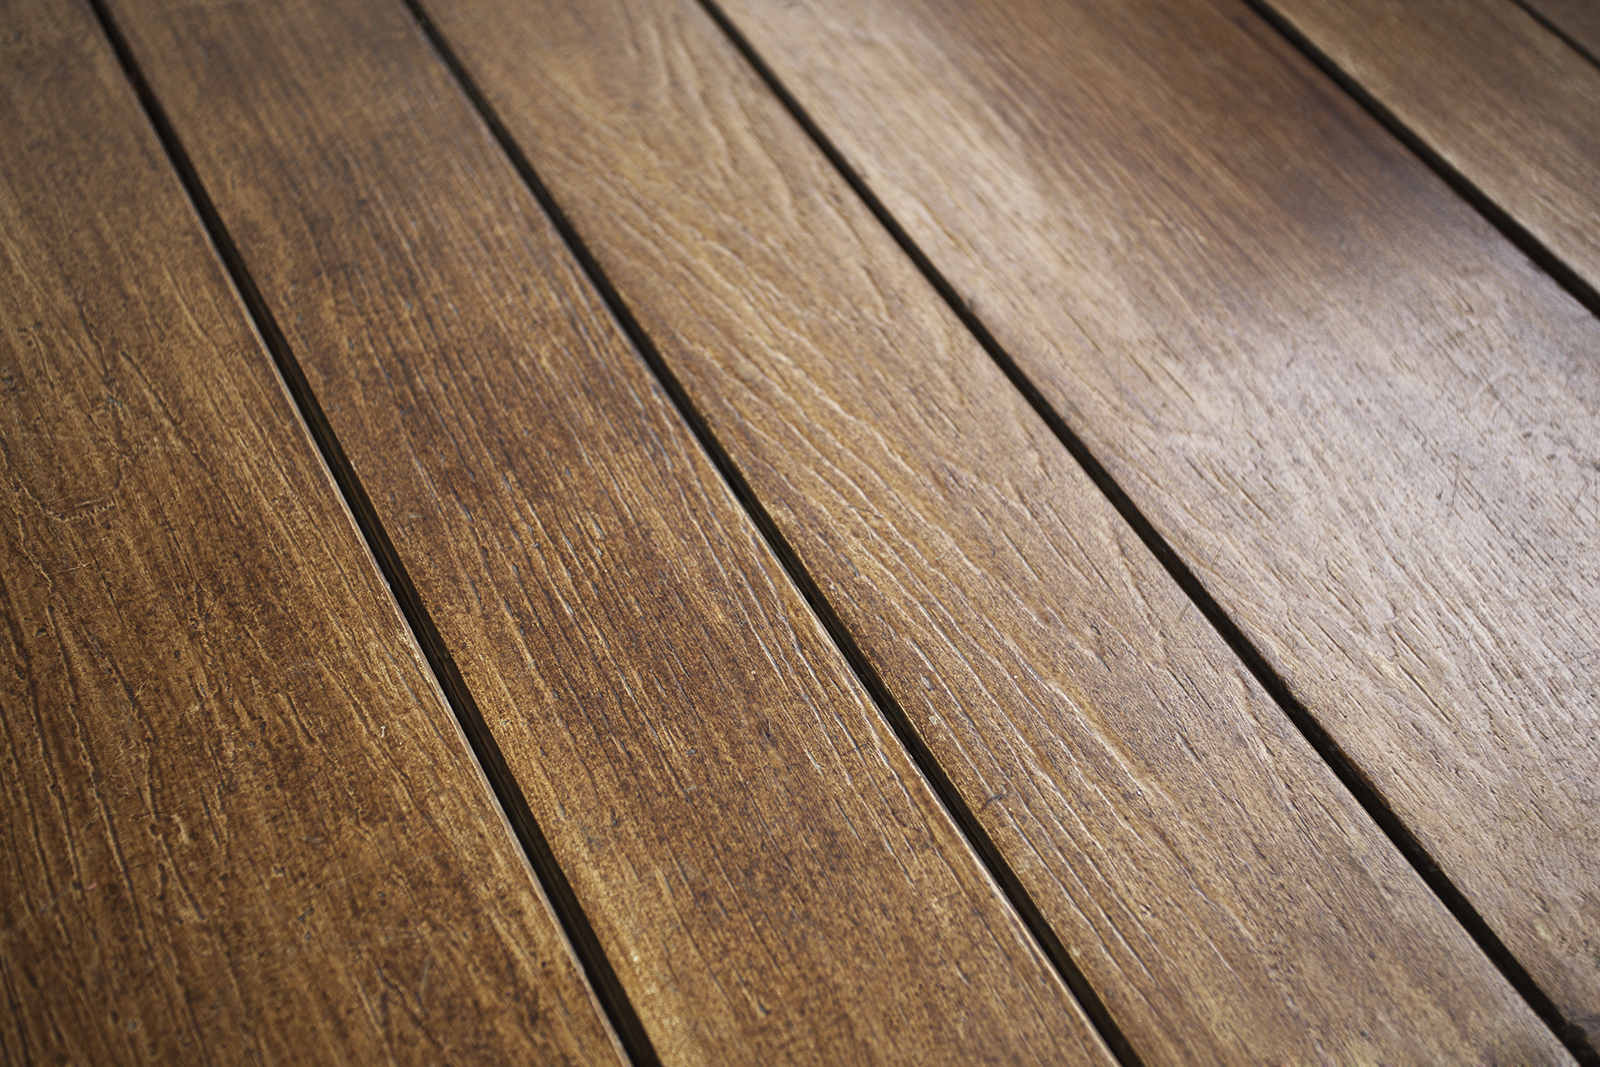 SHERA A2 Fire Rated Decking with timber grain effect